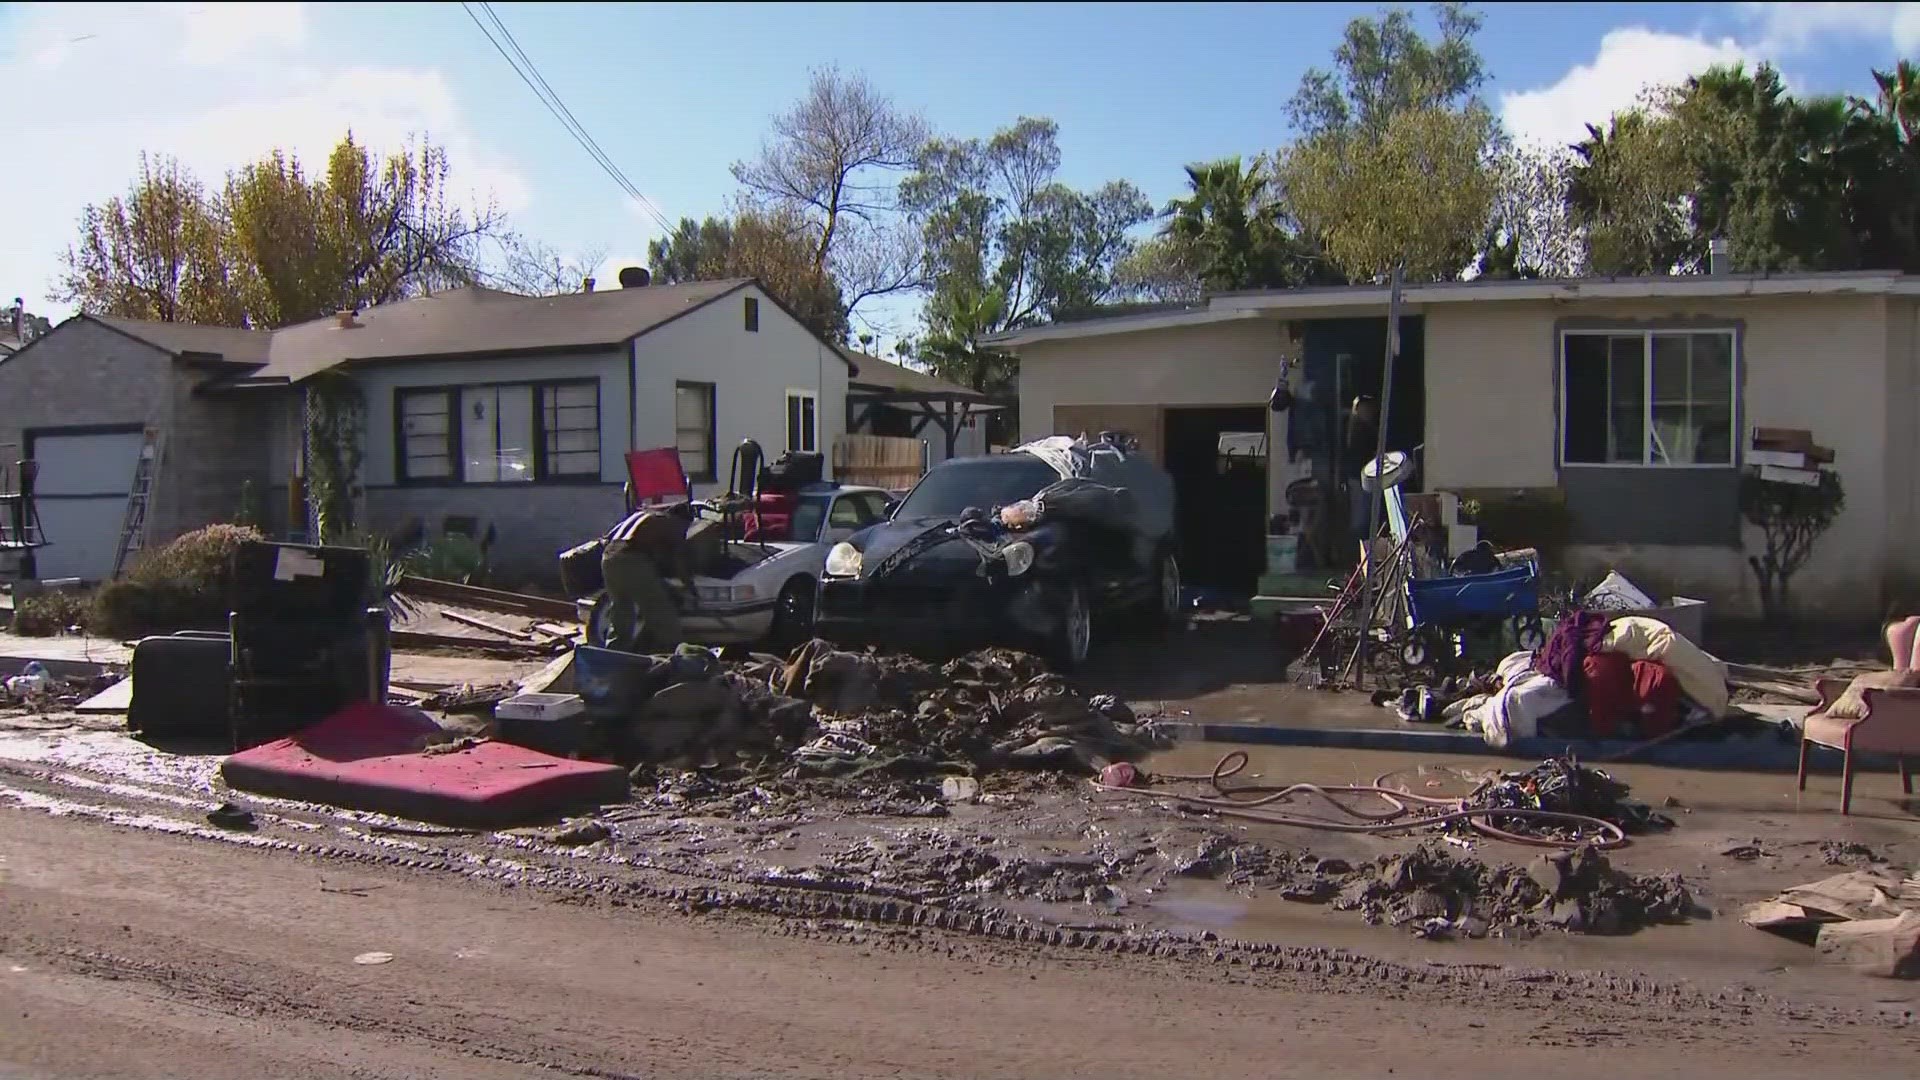 Monday's rain caused major damage to several homes in the Mountain View neighborhood.